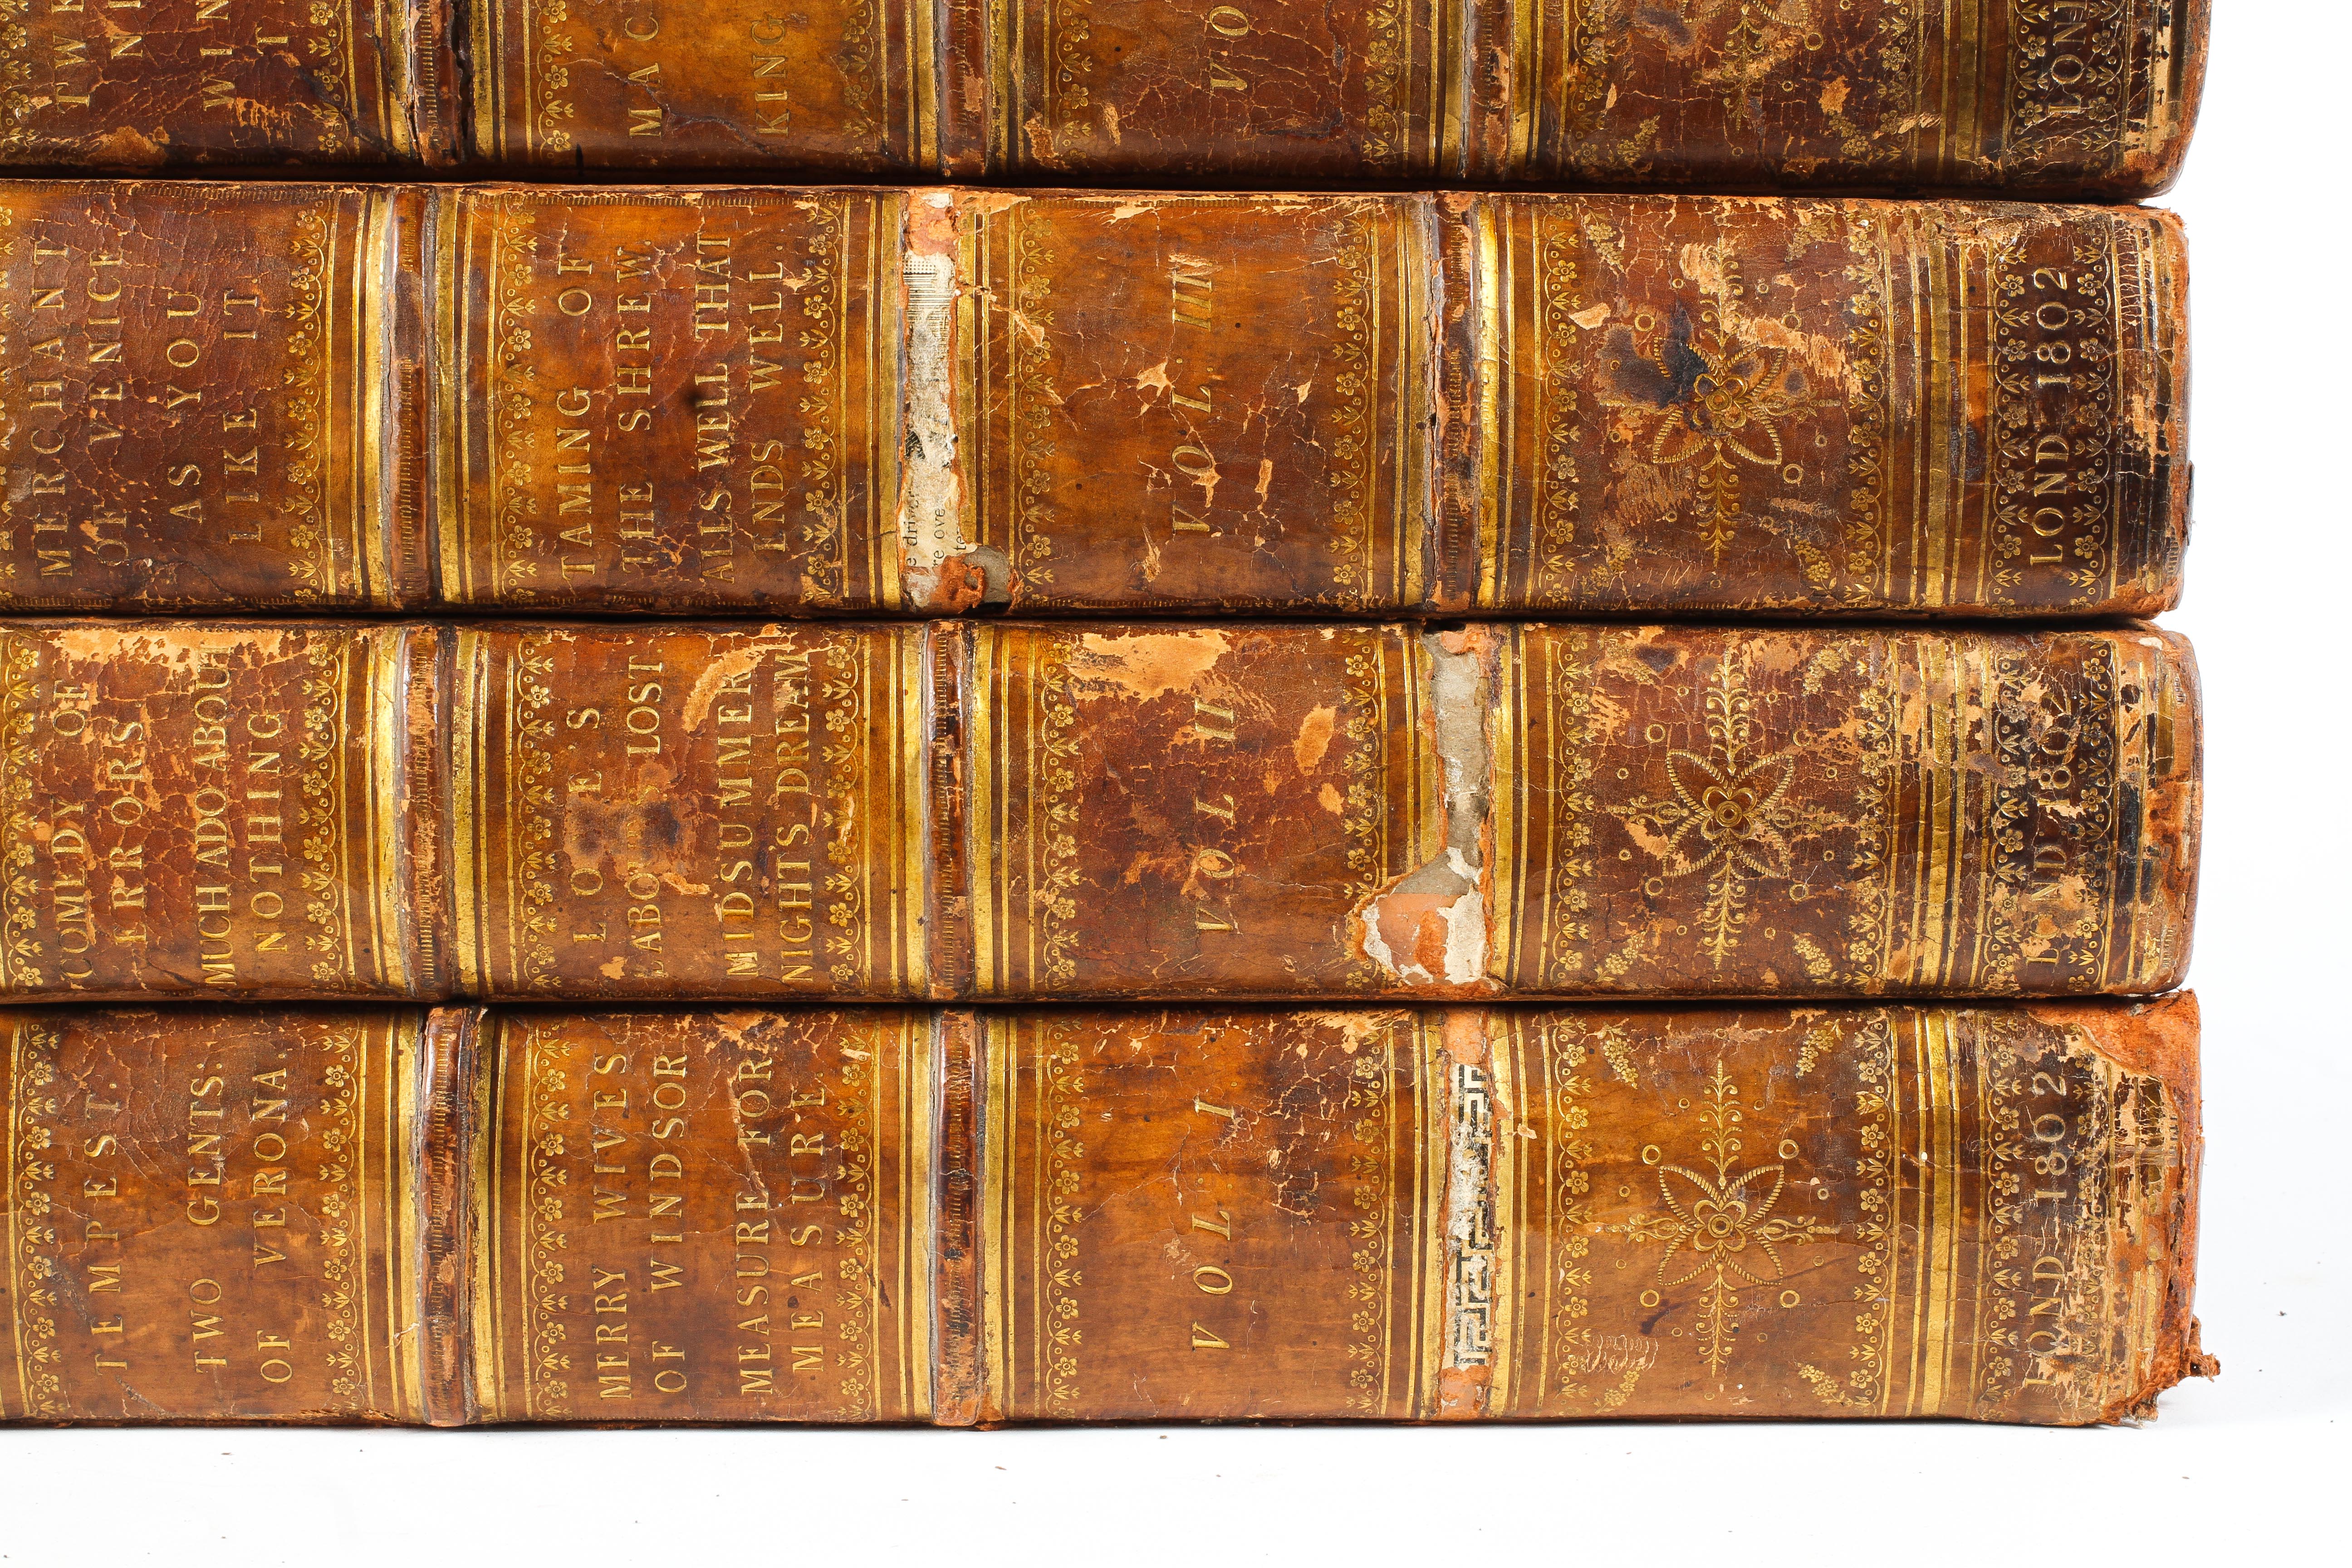 Nine Volumes of 'The Dramatic Works of Shakespeare'. - Image 4 of 7